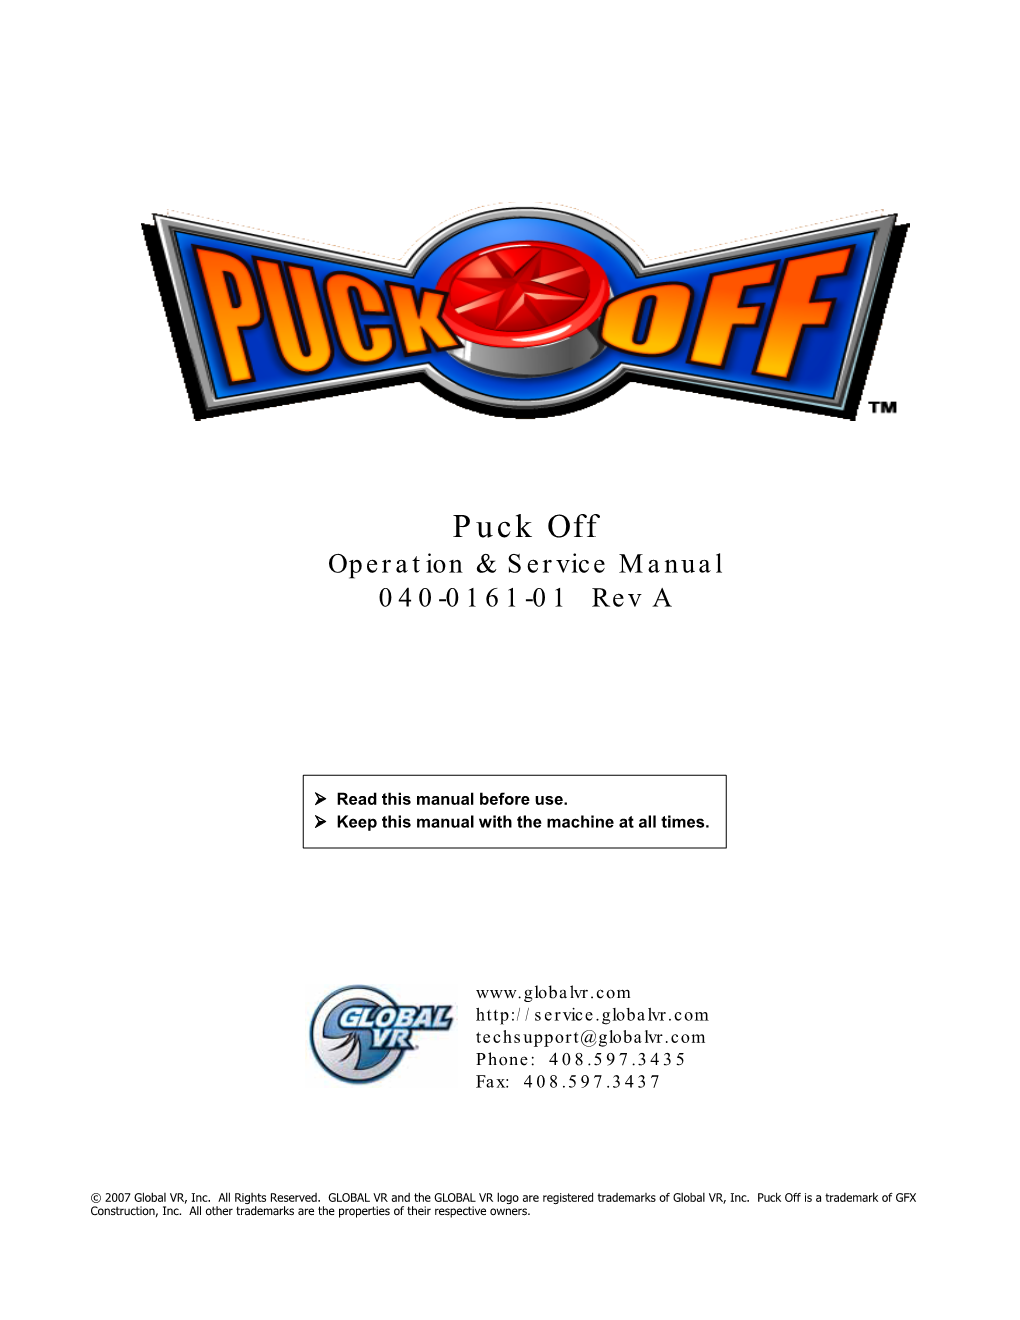 Puck Off Operation & Service Manual